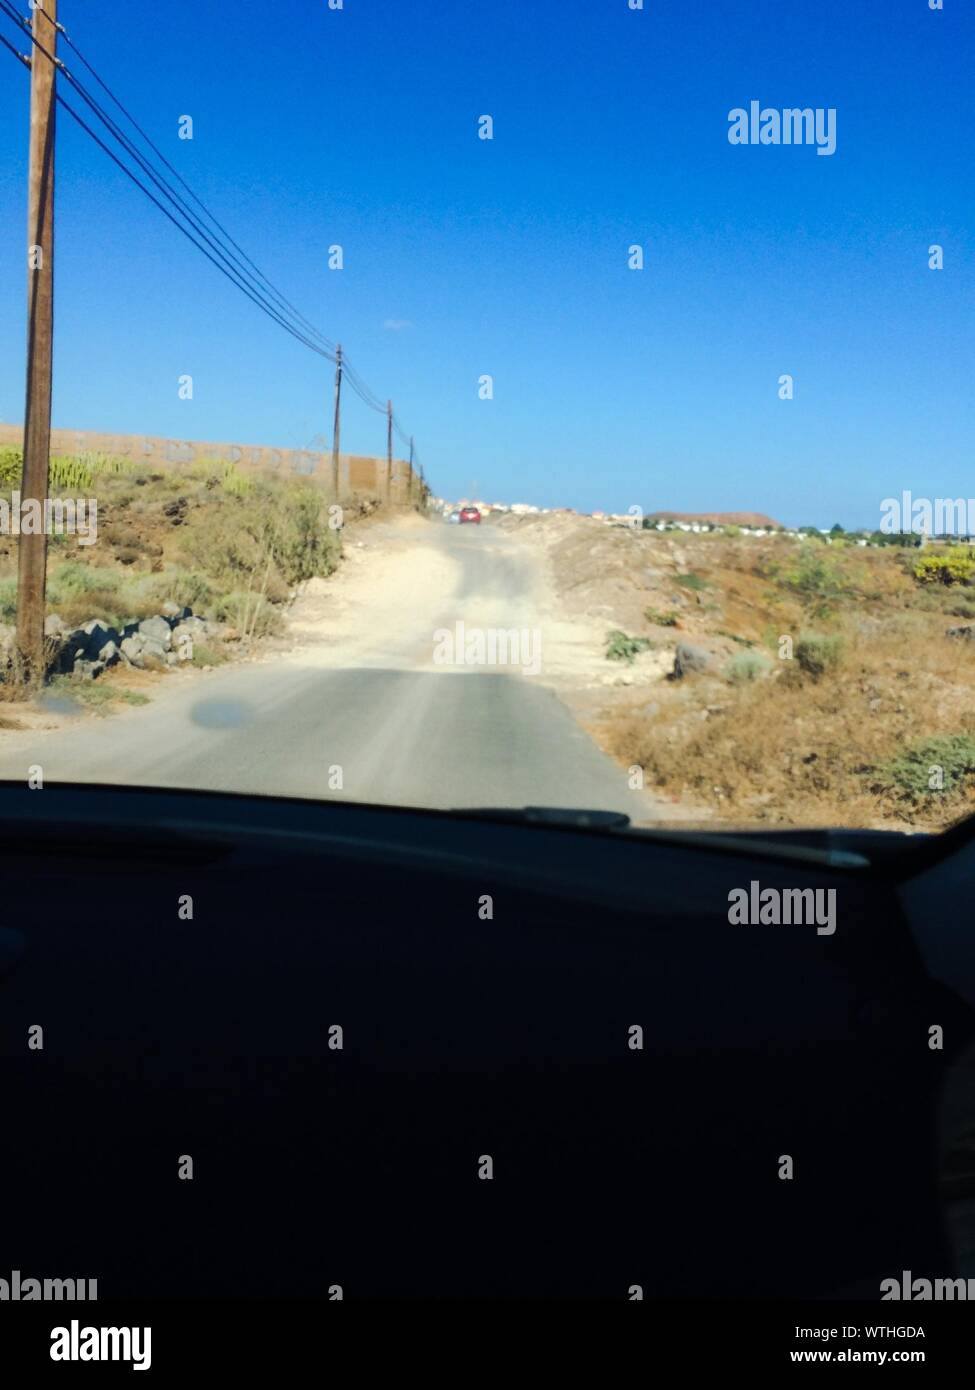 Cropped Image Of Car On Single Lane Road Against Clear Blue Sky Stock Photo